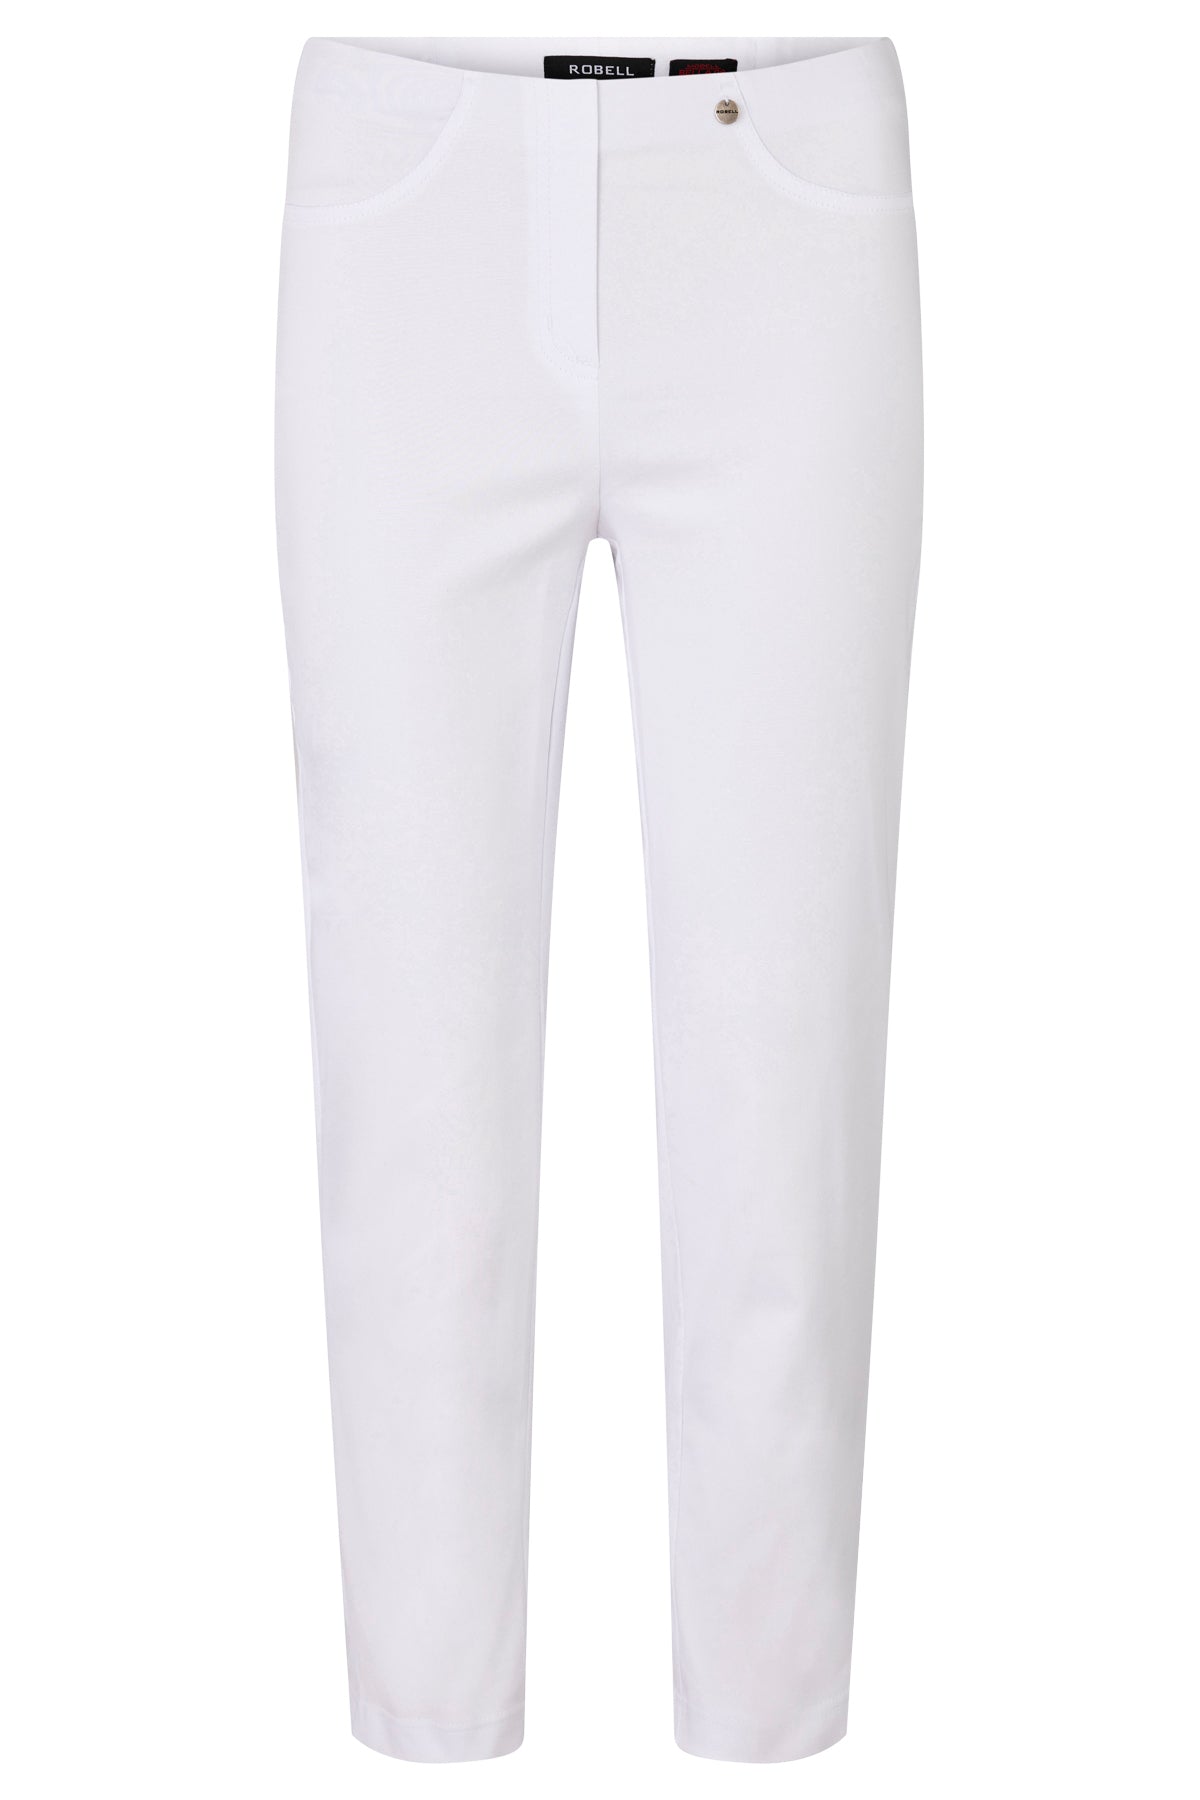 Robell Bella 7/8 White Cropped Trousers